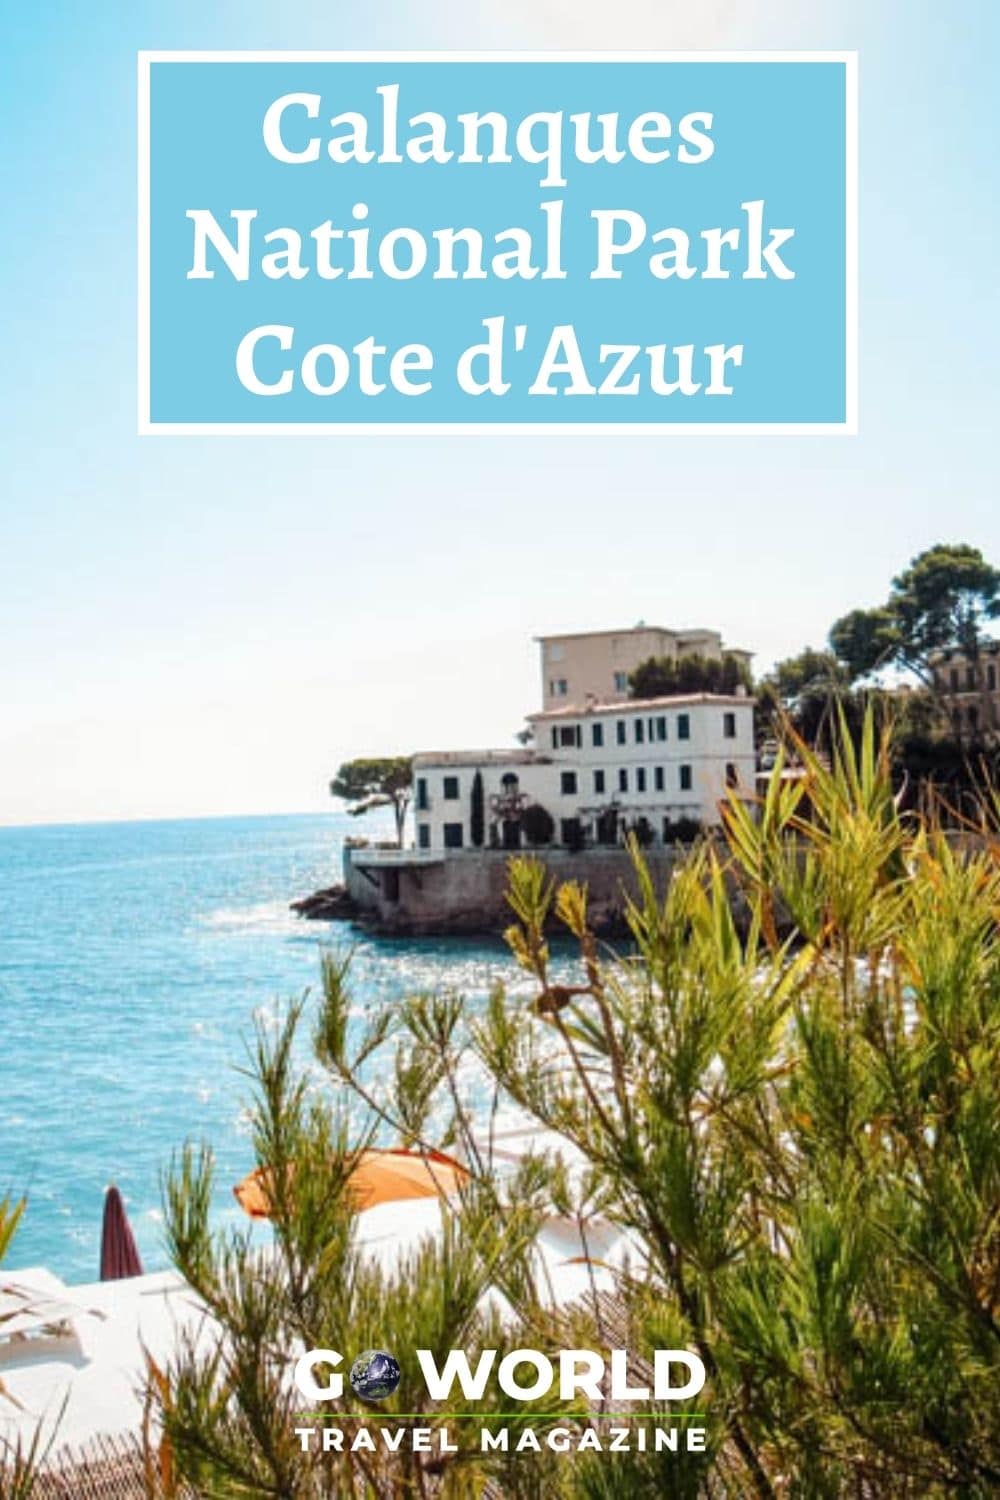 Between Marseille and Cassis lies the Calanques National Park, a paradise of turquoise waters and breathtaking cliffs along the Côte d'Azur. #cotedazur #frenchcoast